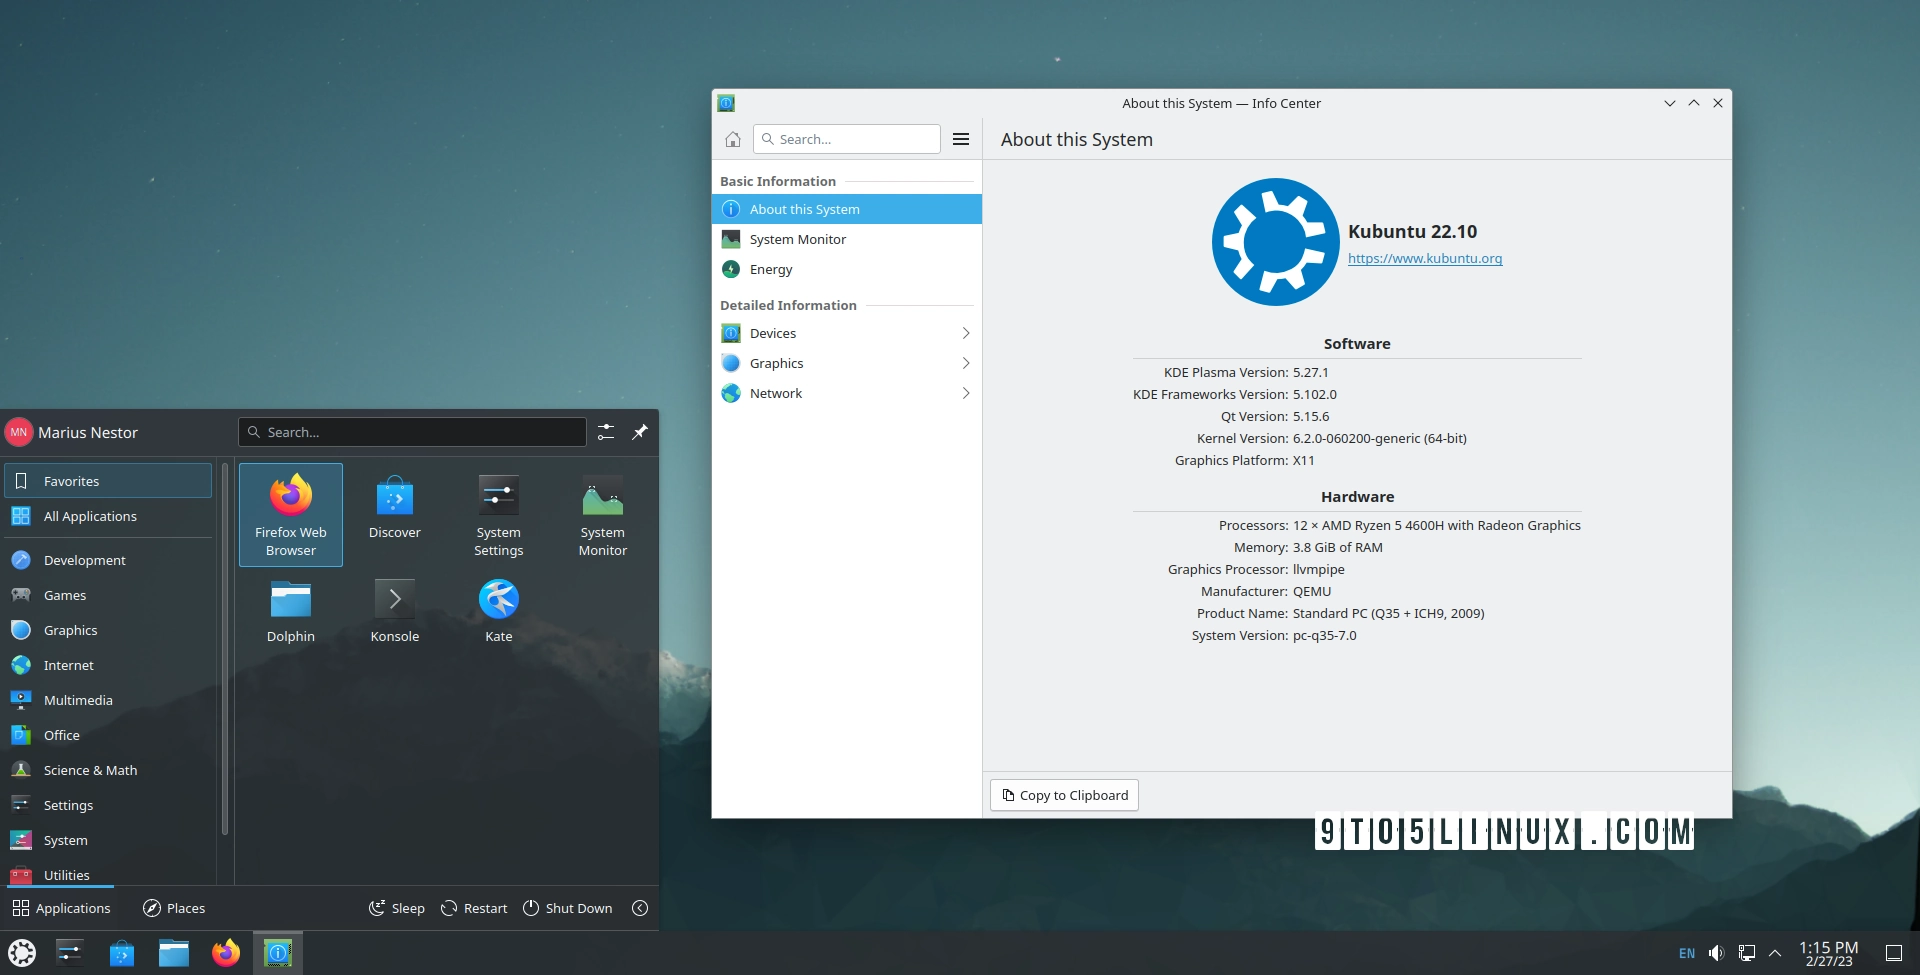 You Can Now Install KDE Plasma 5.27 LTS on Kubuntu 22.10, Here’s How